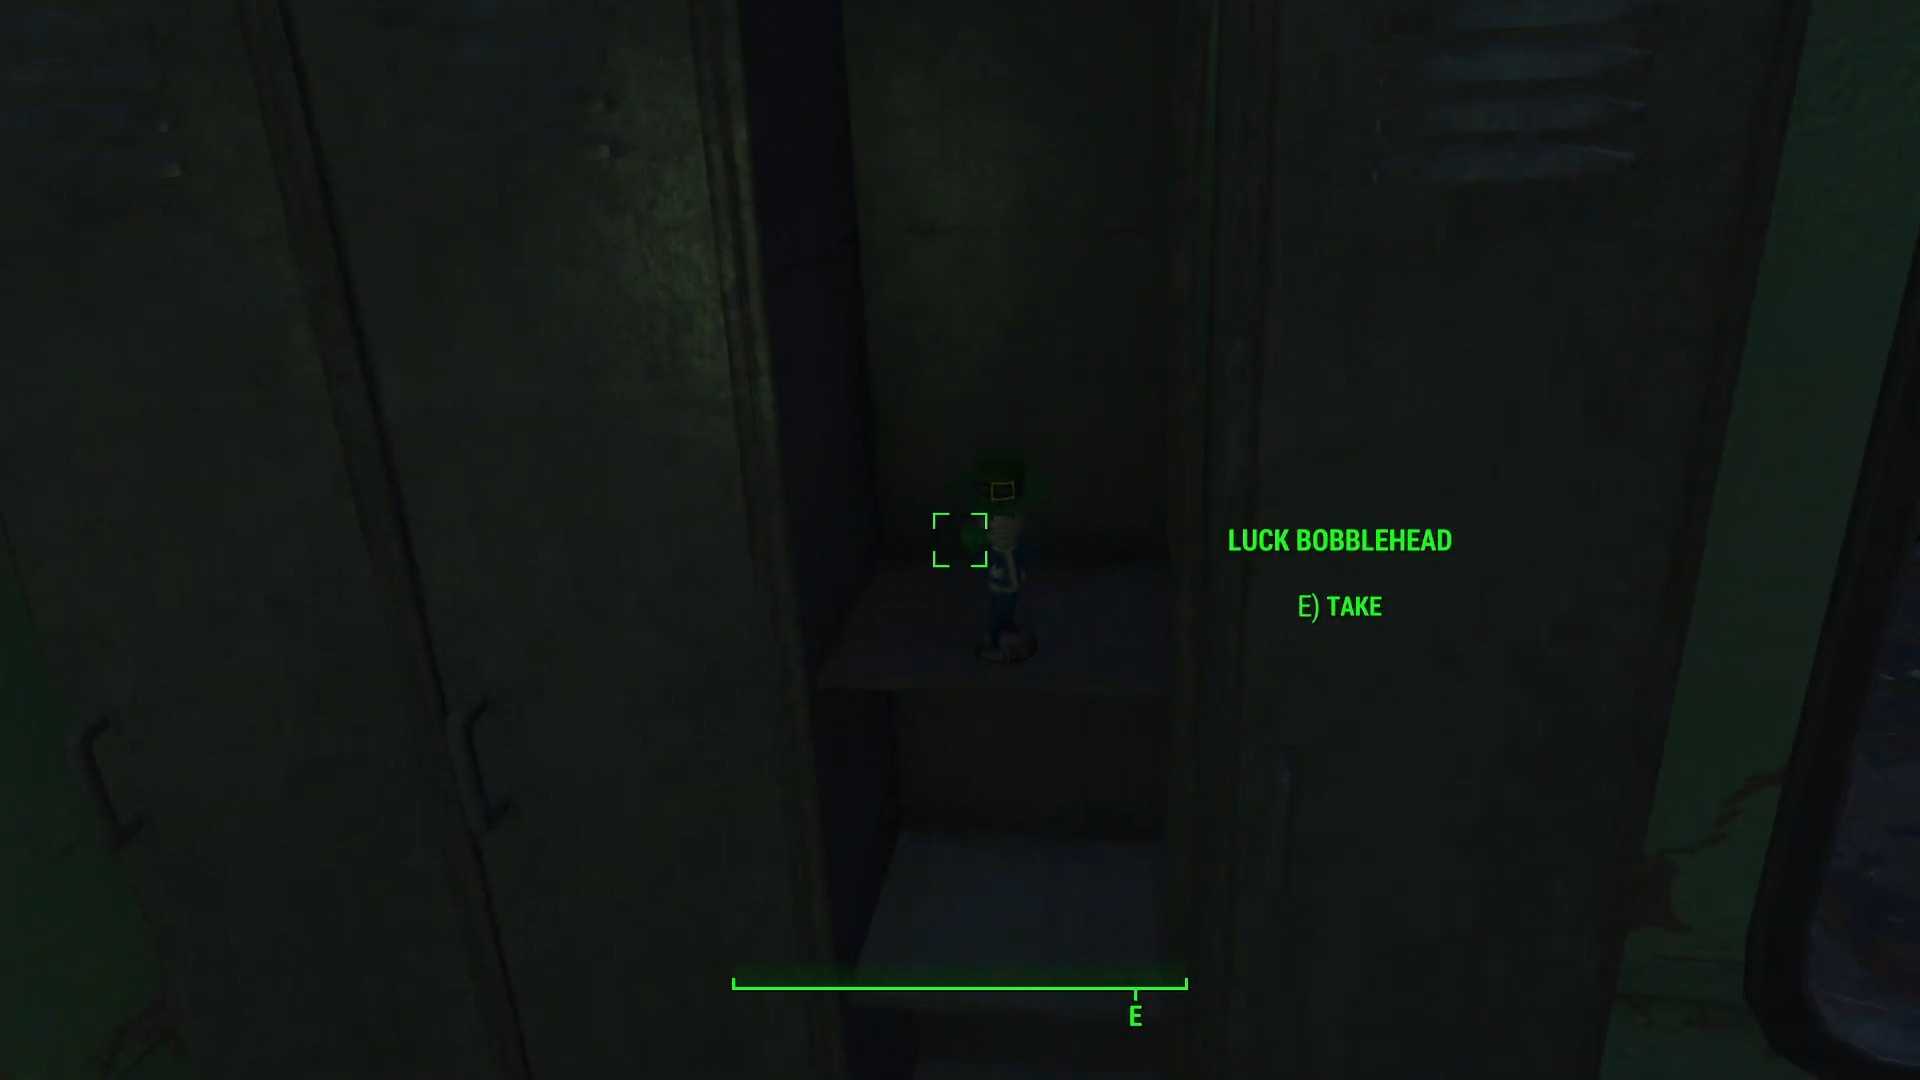 The Luck Bobblehead in Fallout 4